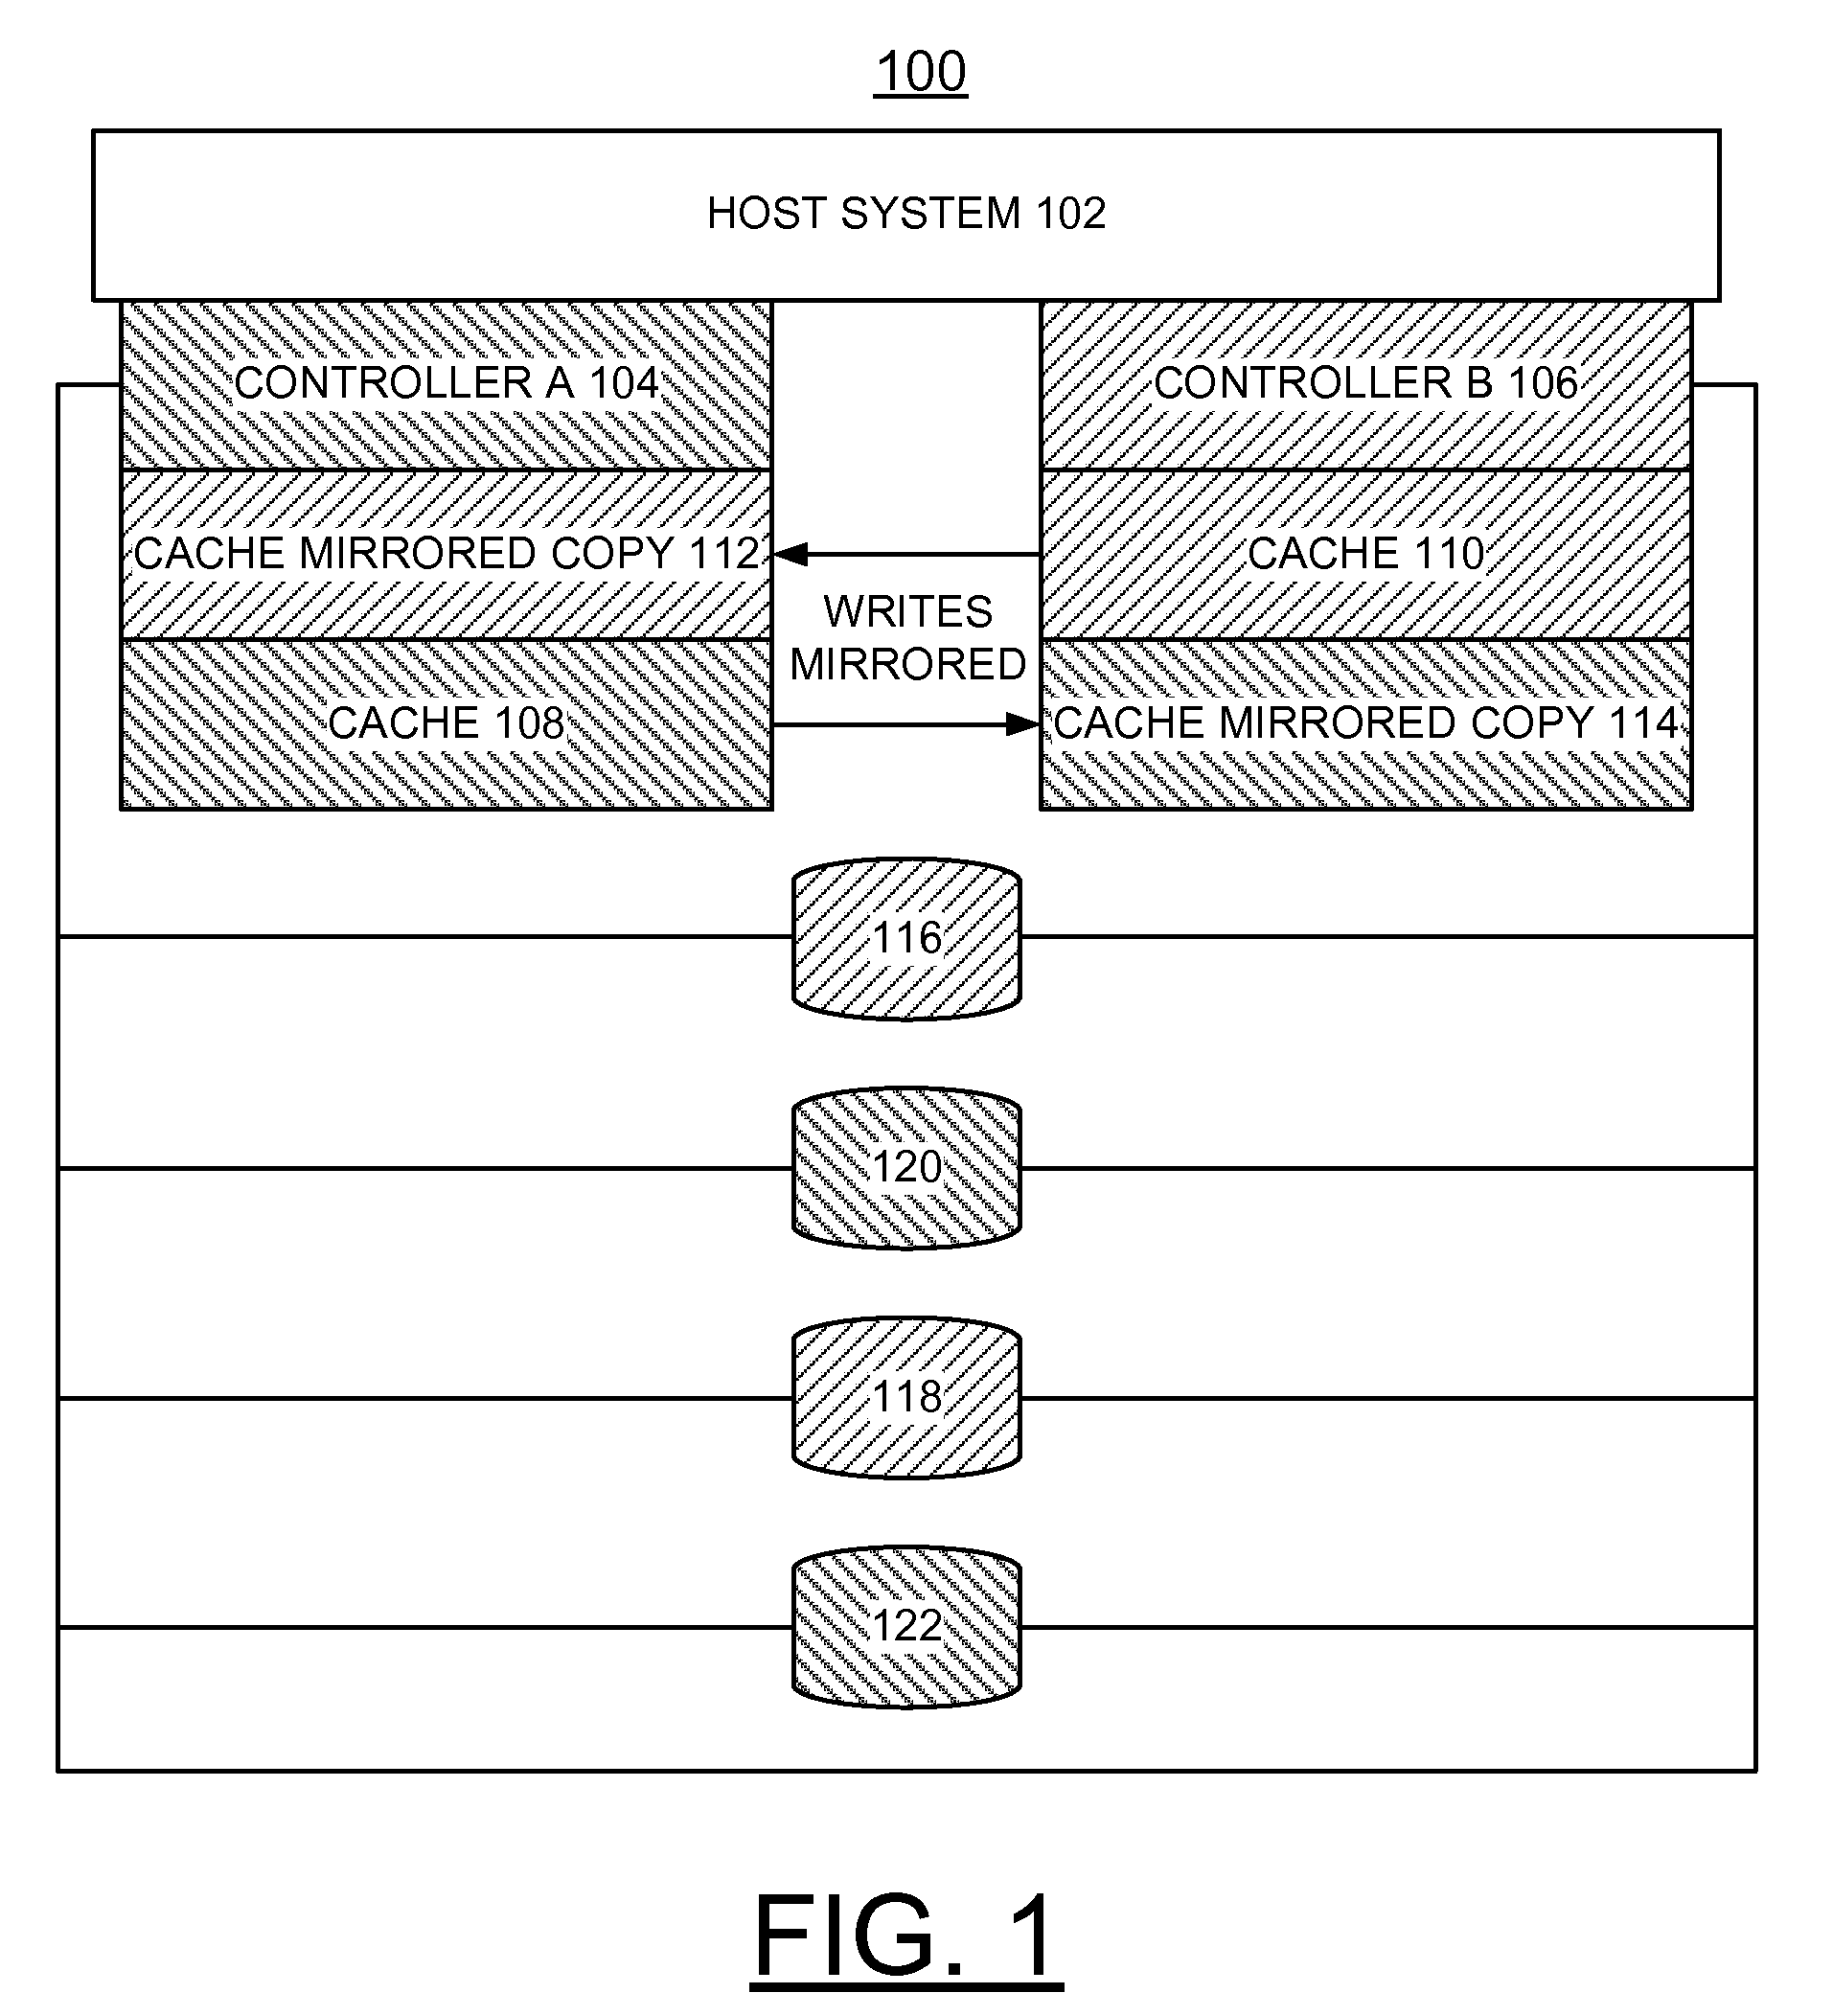 Implementing enhanced data caching and takeover of non-owned storage devices in dual storage device controller configuration with data in write cache